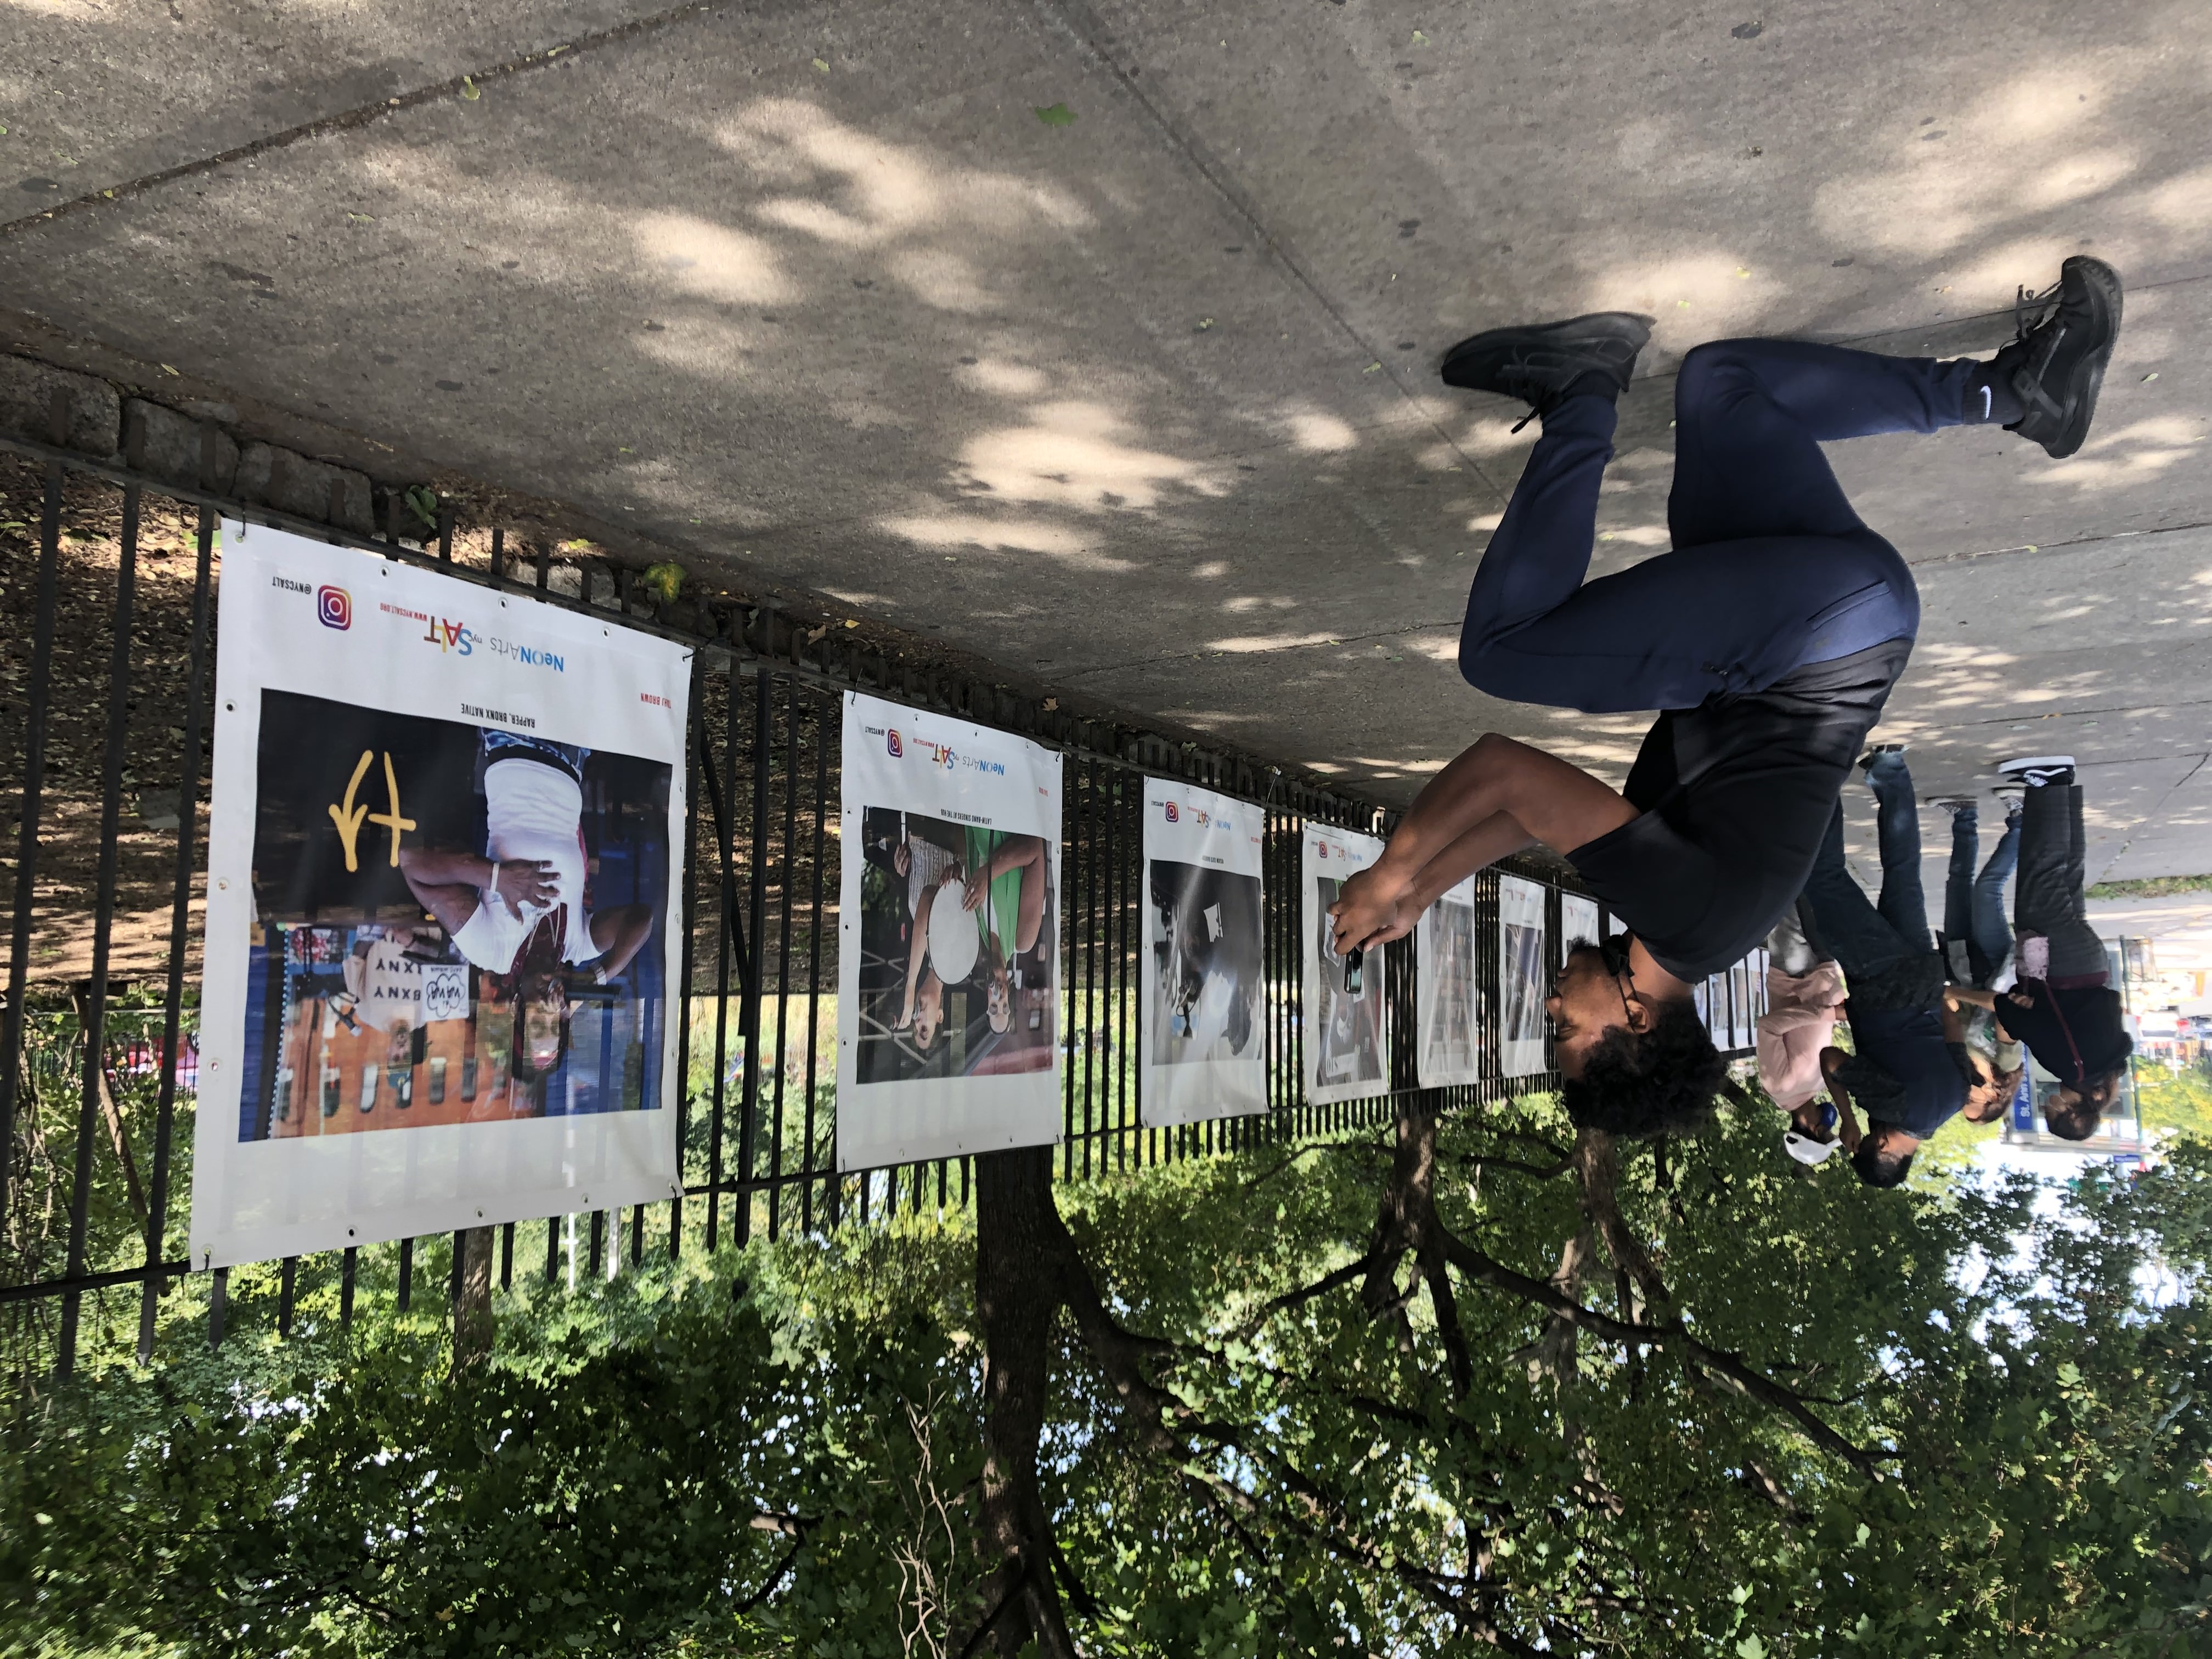 NYC Salt Students Help Fuel New “Beautify NYC” Initiative with Photography